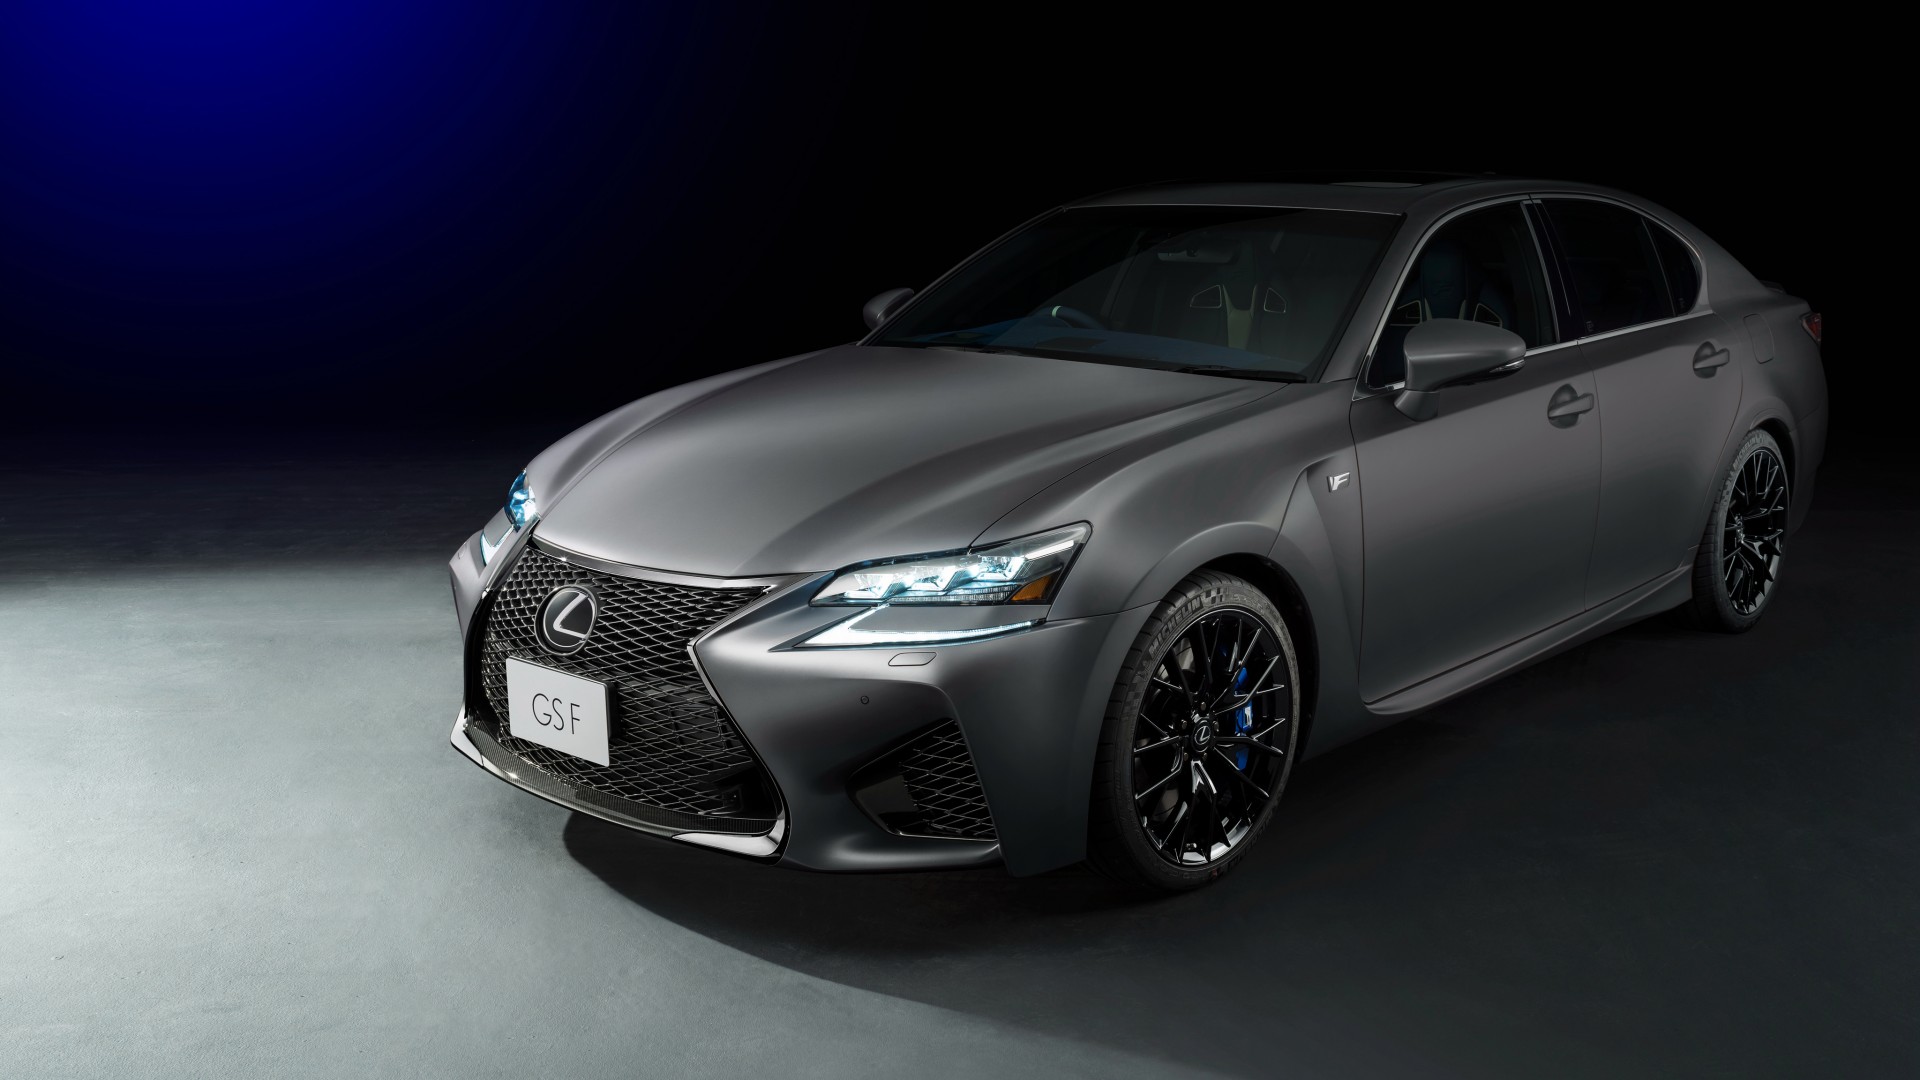 Download Lexus Gs F 10th Anniversary Hd Wallpaper For Desktop And Mobiles Iphone 7 Plus Iphone 8 Plus Hd Wallpaper Wallpapers Net